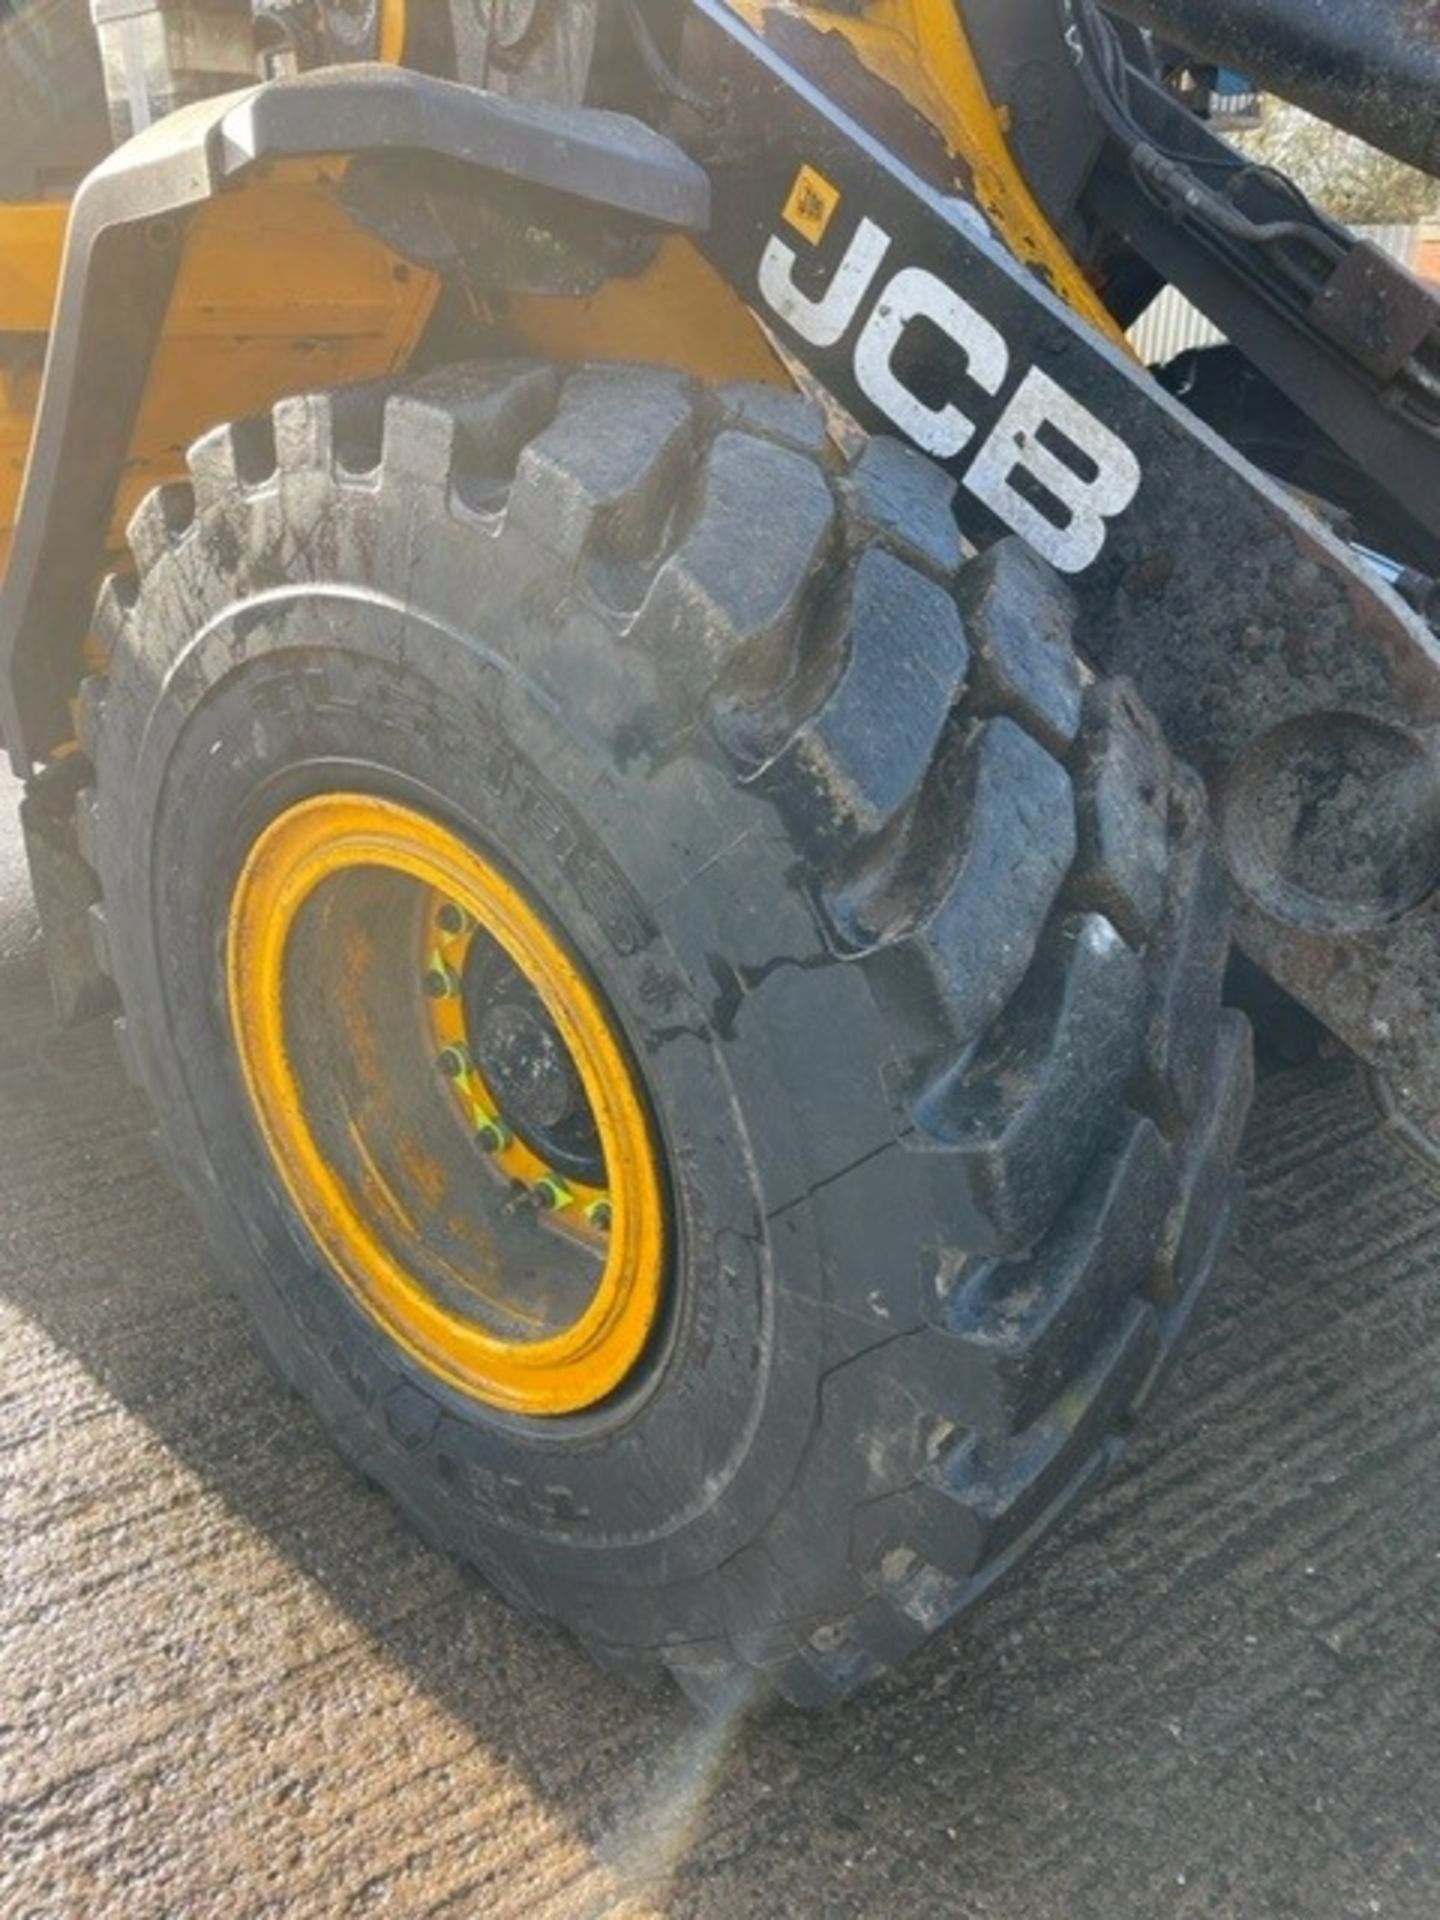 JCB, Wastemaster 427 S5, wheel loader, PIN: JCB4A5A9VK2679908 (2019), Last known Hours 3775.8, - Image 8 of 24